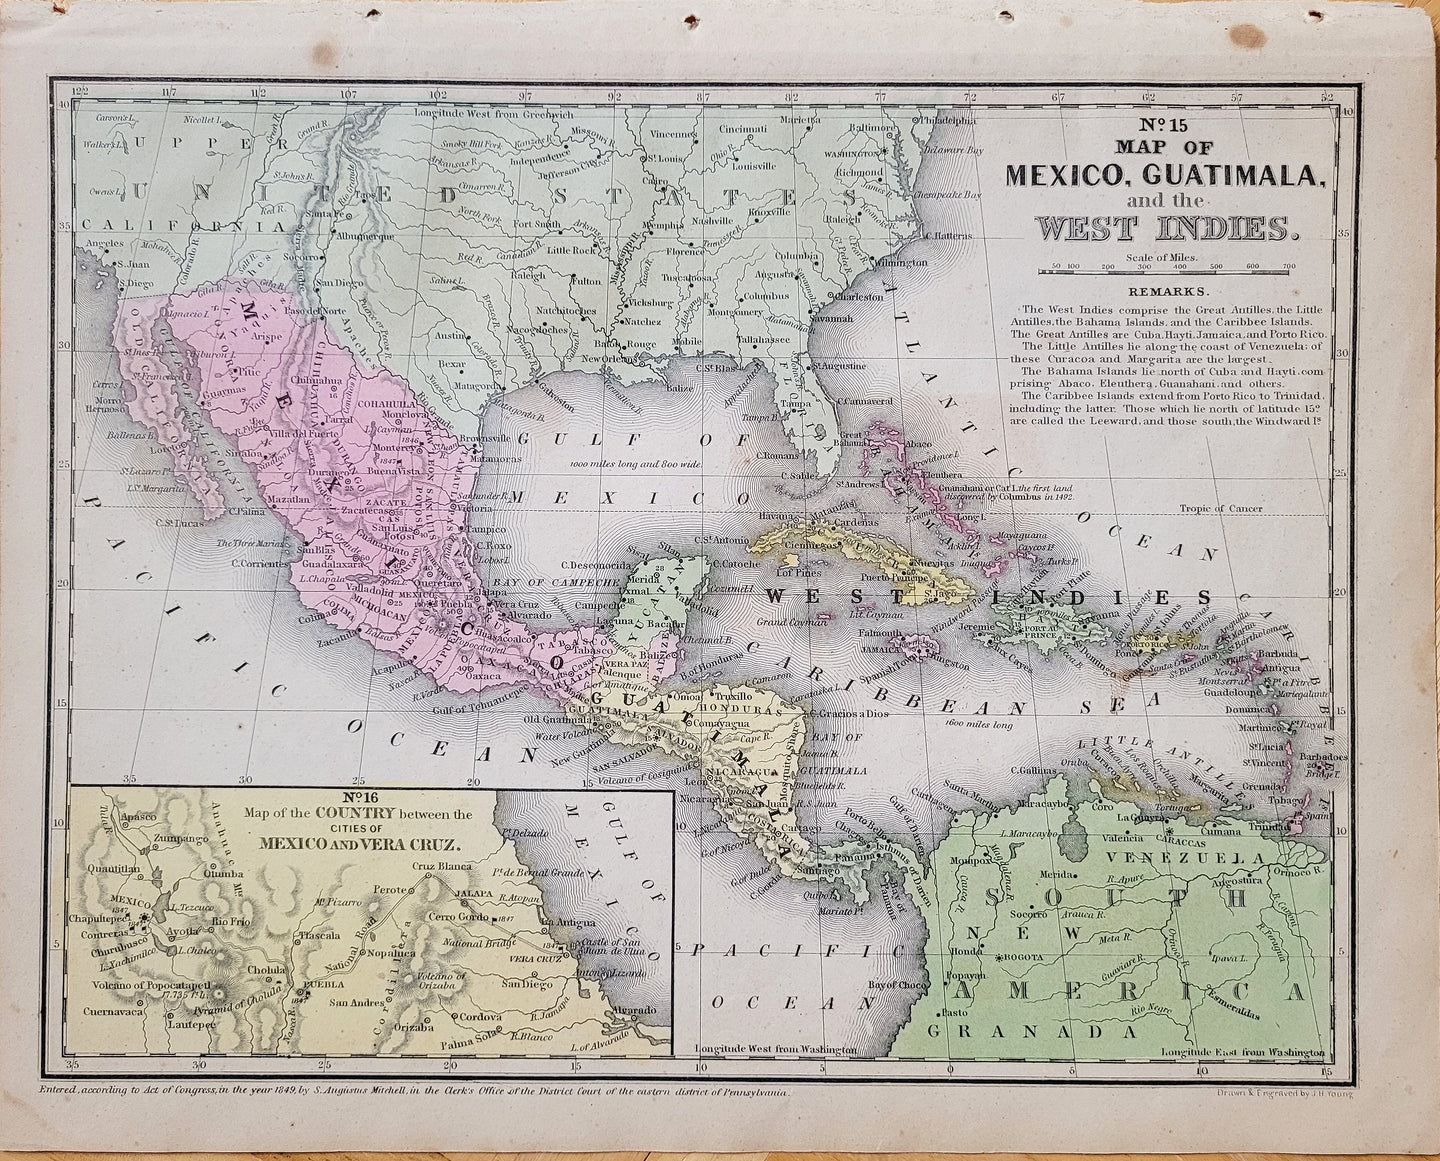 CAR047A-Antique-Hand-Colored-Map-No-15-Map-of-Mexico-Central-America-and-the-West-Indies-Caribbean--Latin-America-Central-America-Caribbean-Mexico-1851-Mitchell-Maps-Of-Antiquity